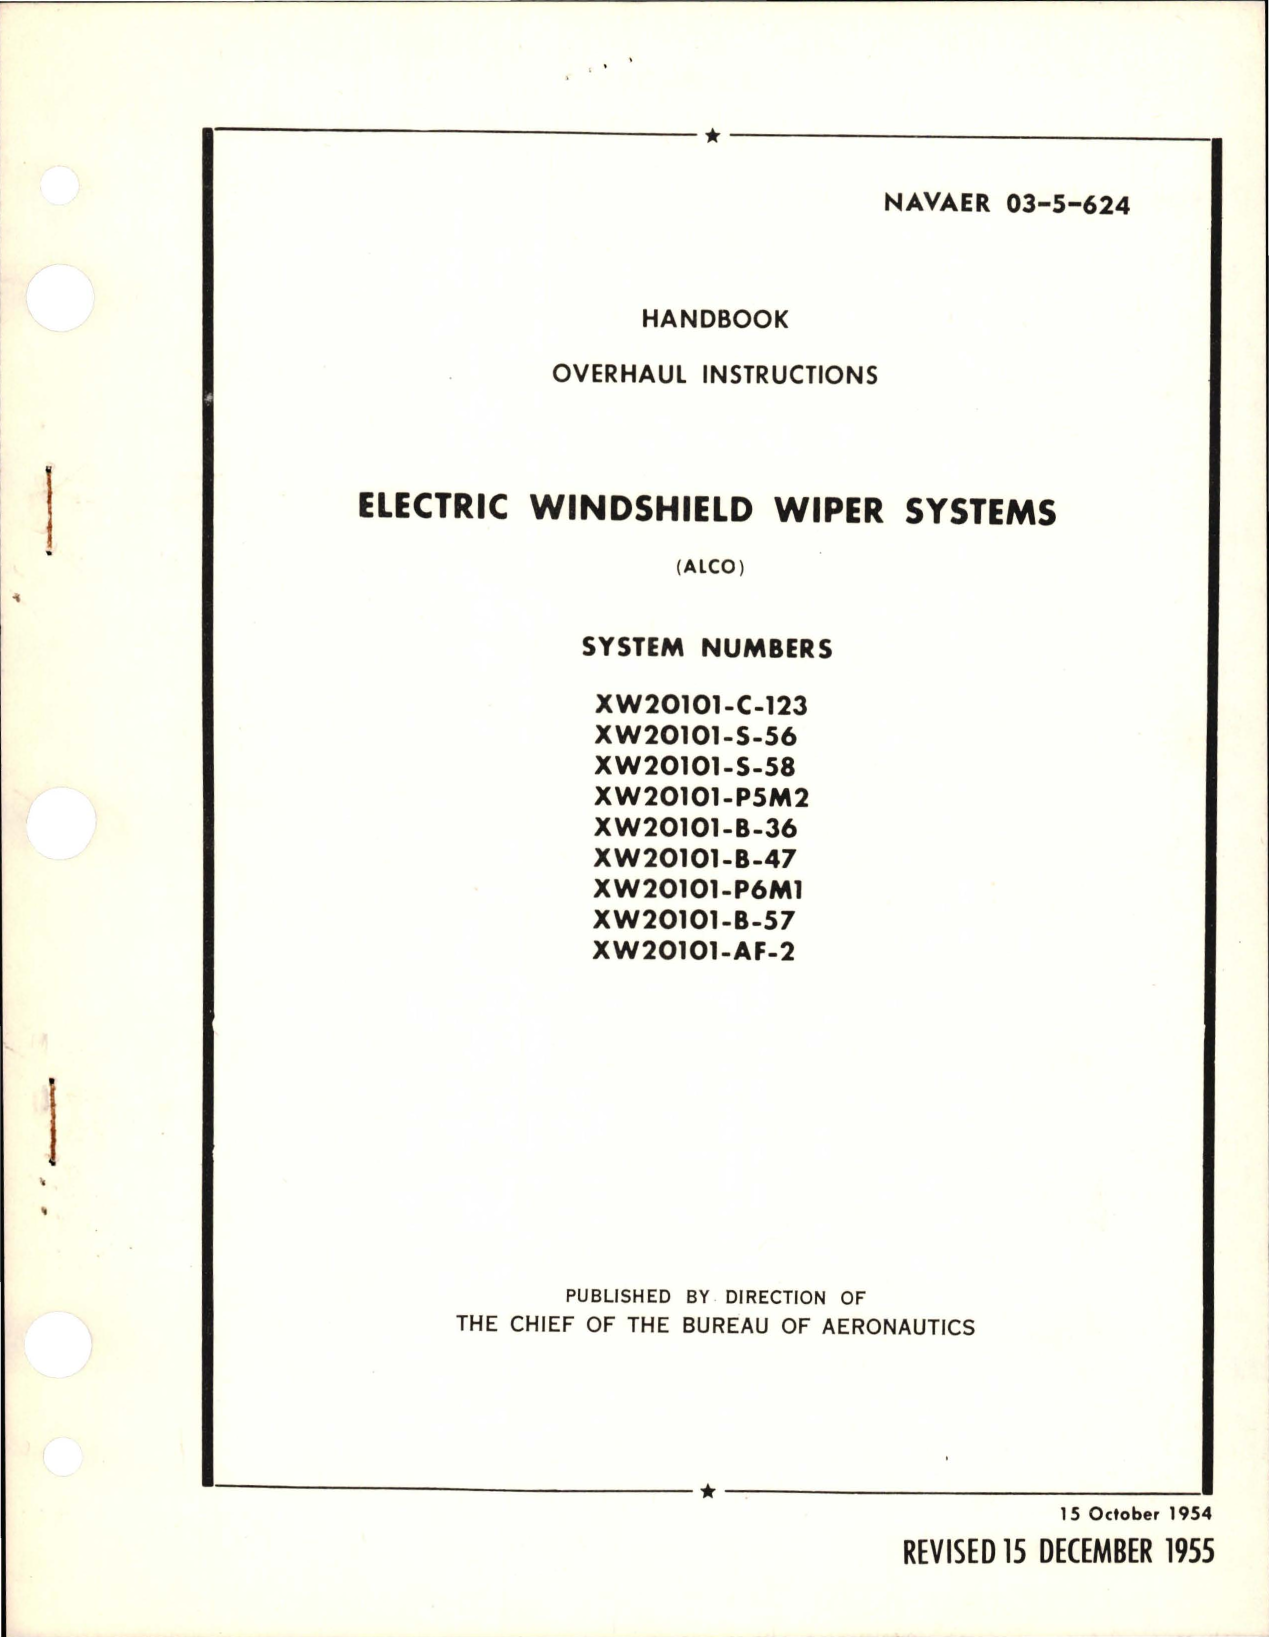 Sample page 1 from AirCorps Library document: Overhaul Instructions for Electric Windshield Wiper Systems  